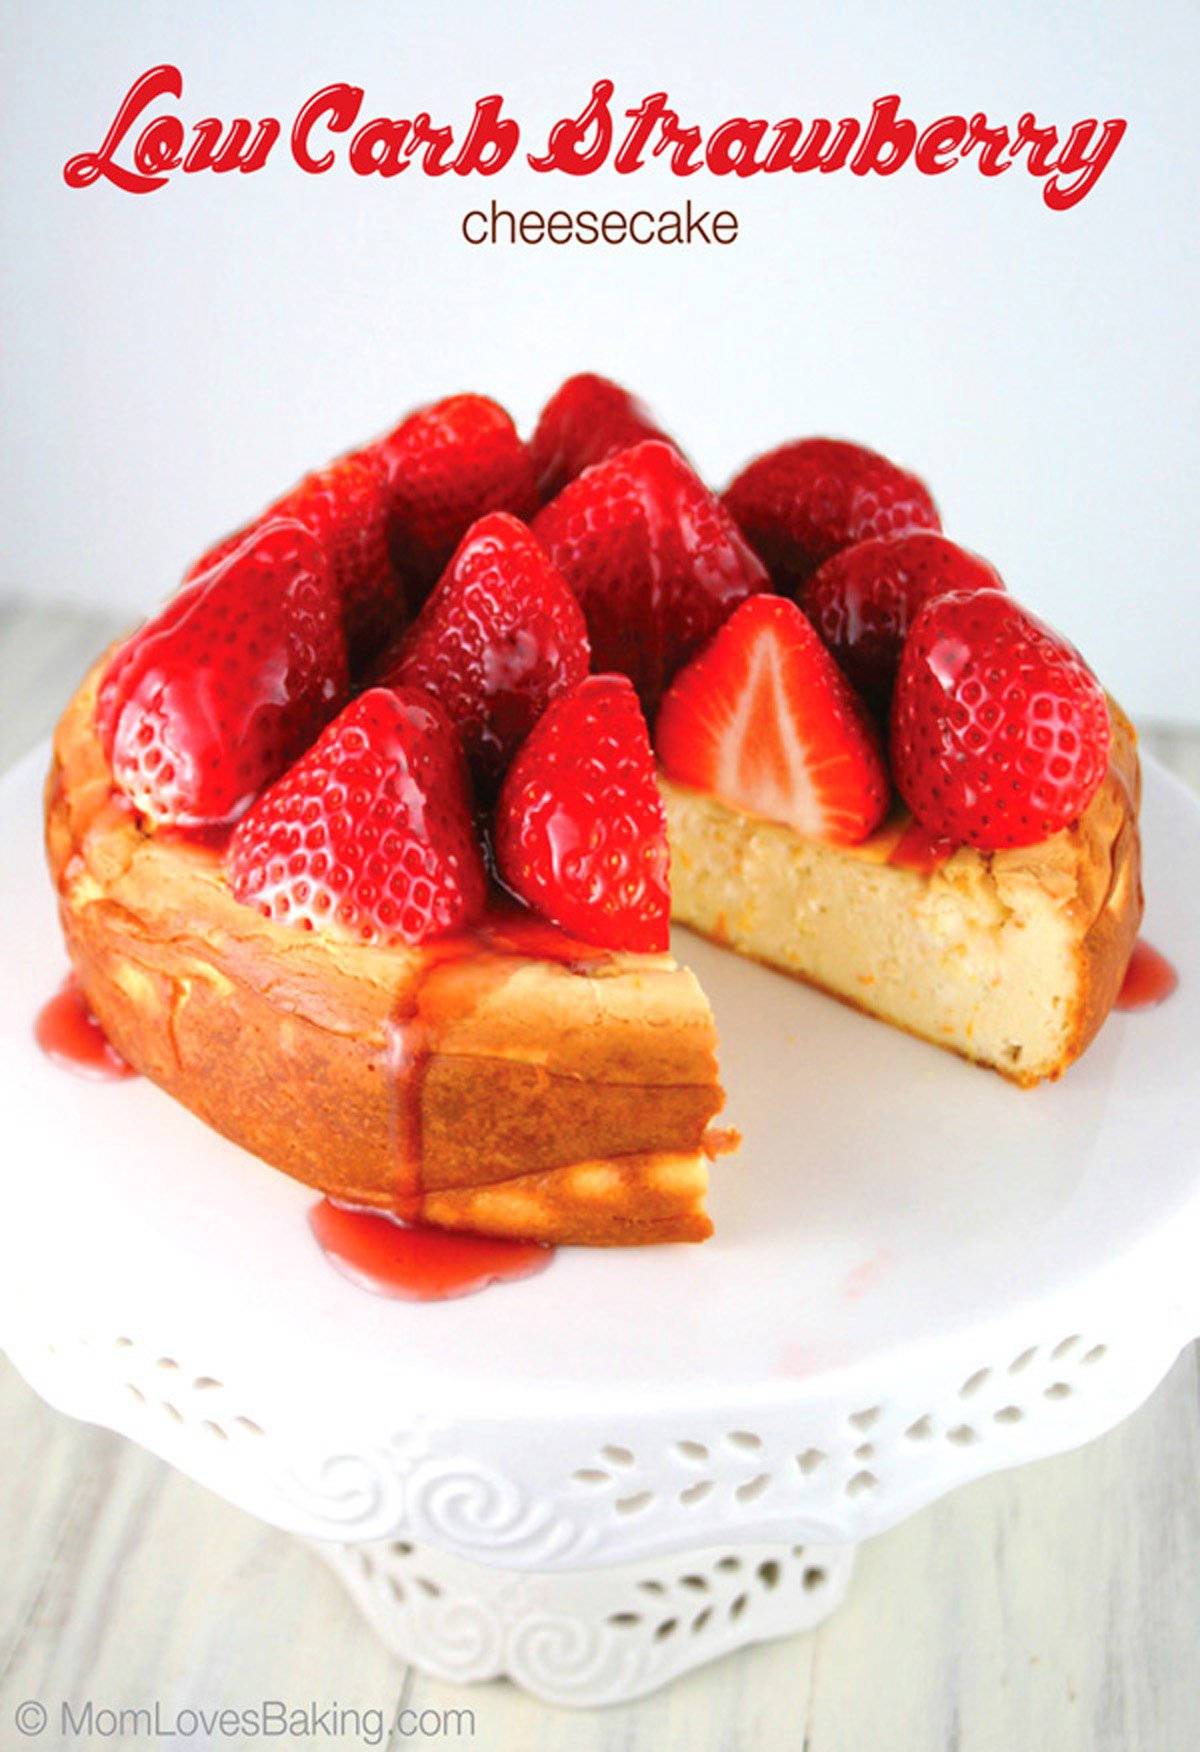 Delicious low carb cheesecake with strawberries.